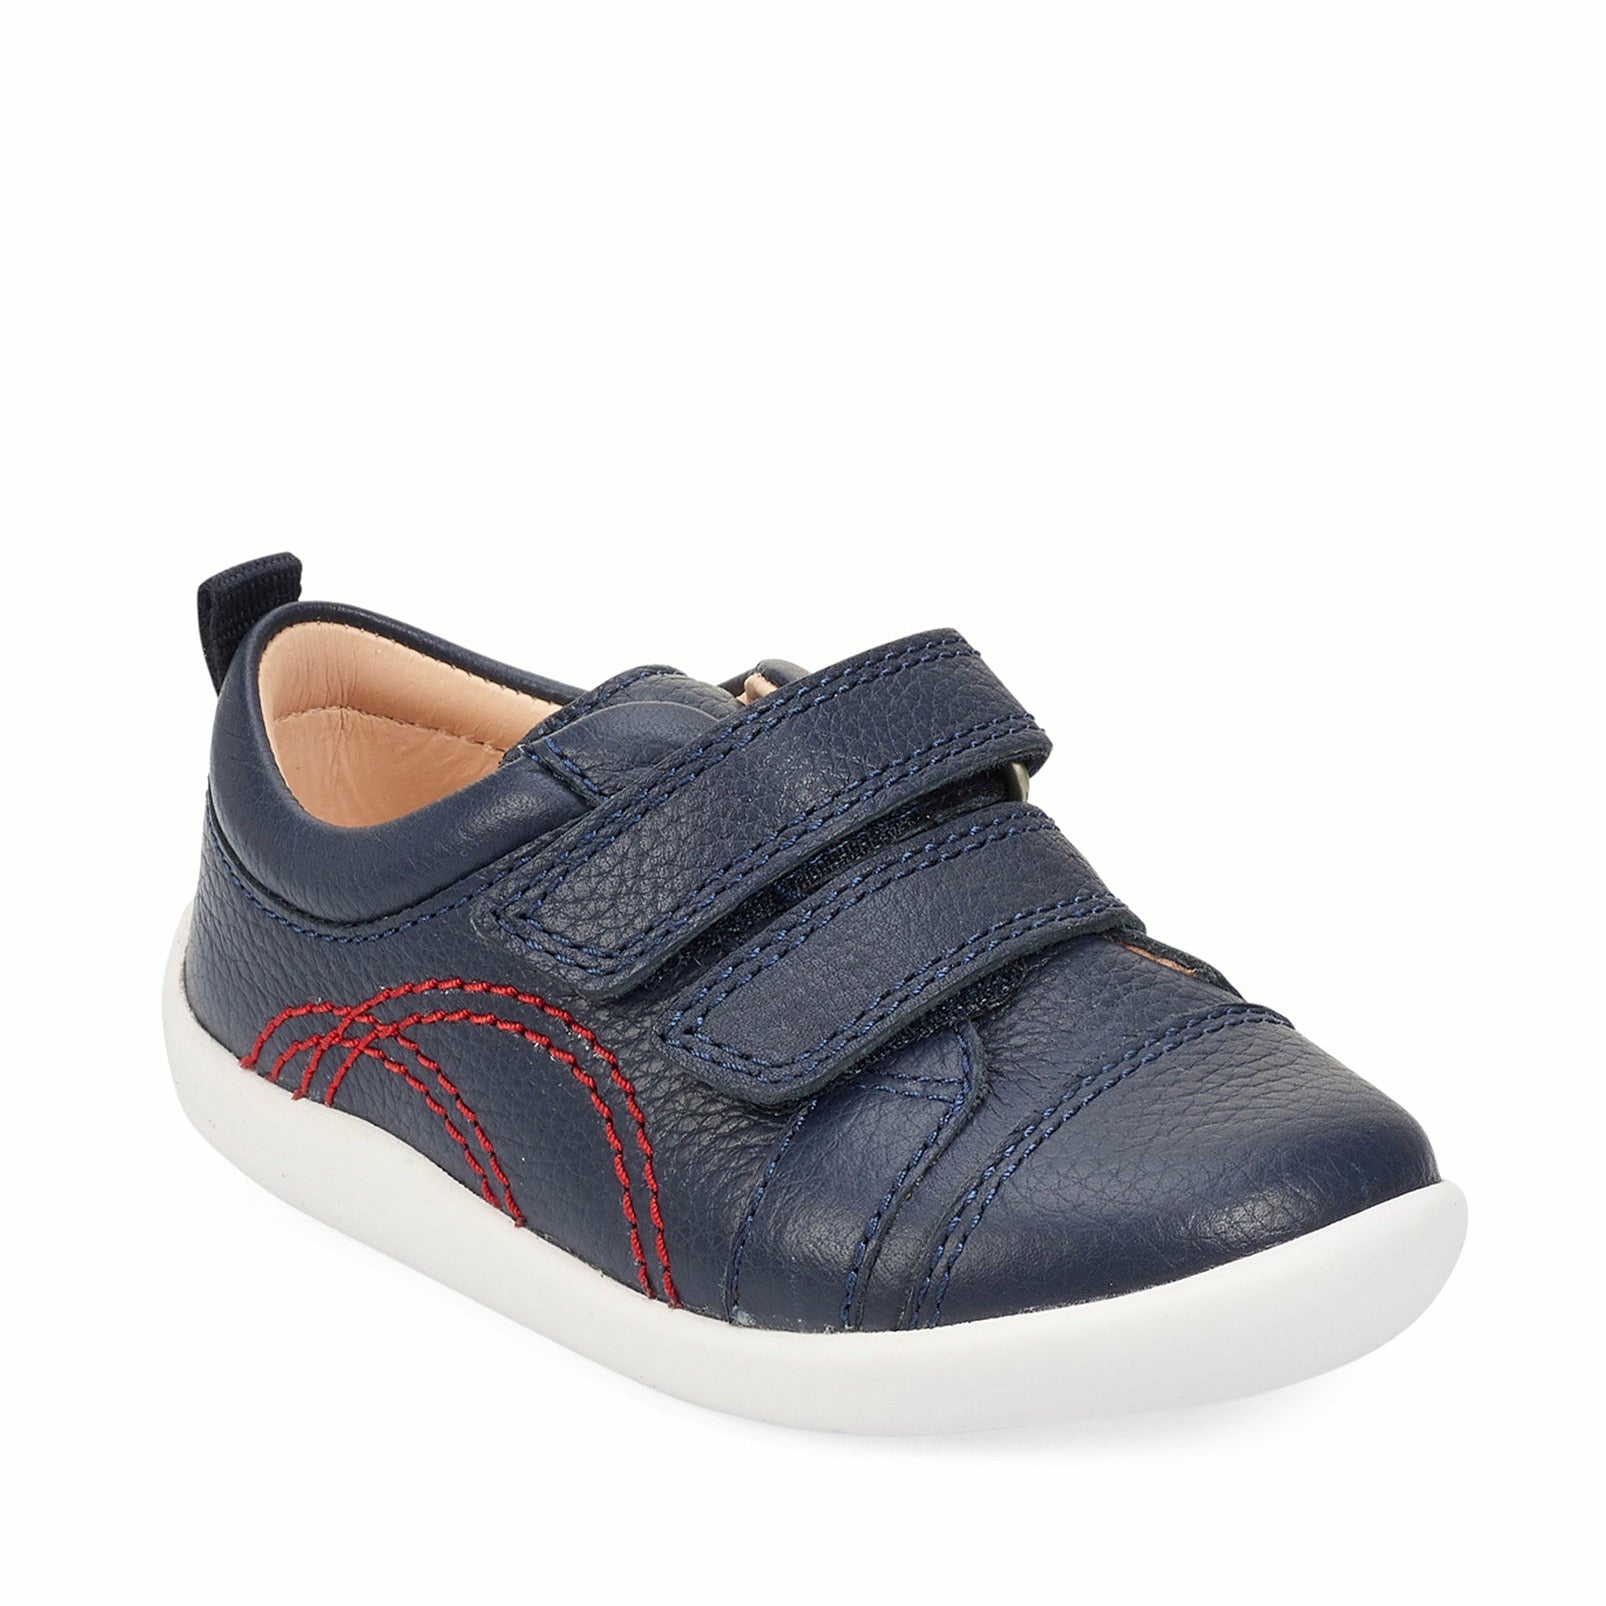 Start-Rite Tree House 0781 - Navy leather boys velcro first walking shoes Start-Rite Shoes | Personal Shoe Fitting Service | Wisemans | Bantry | West Cork | Munster | Ireland